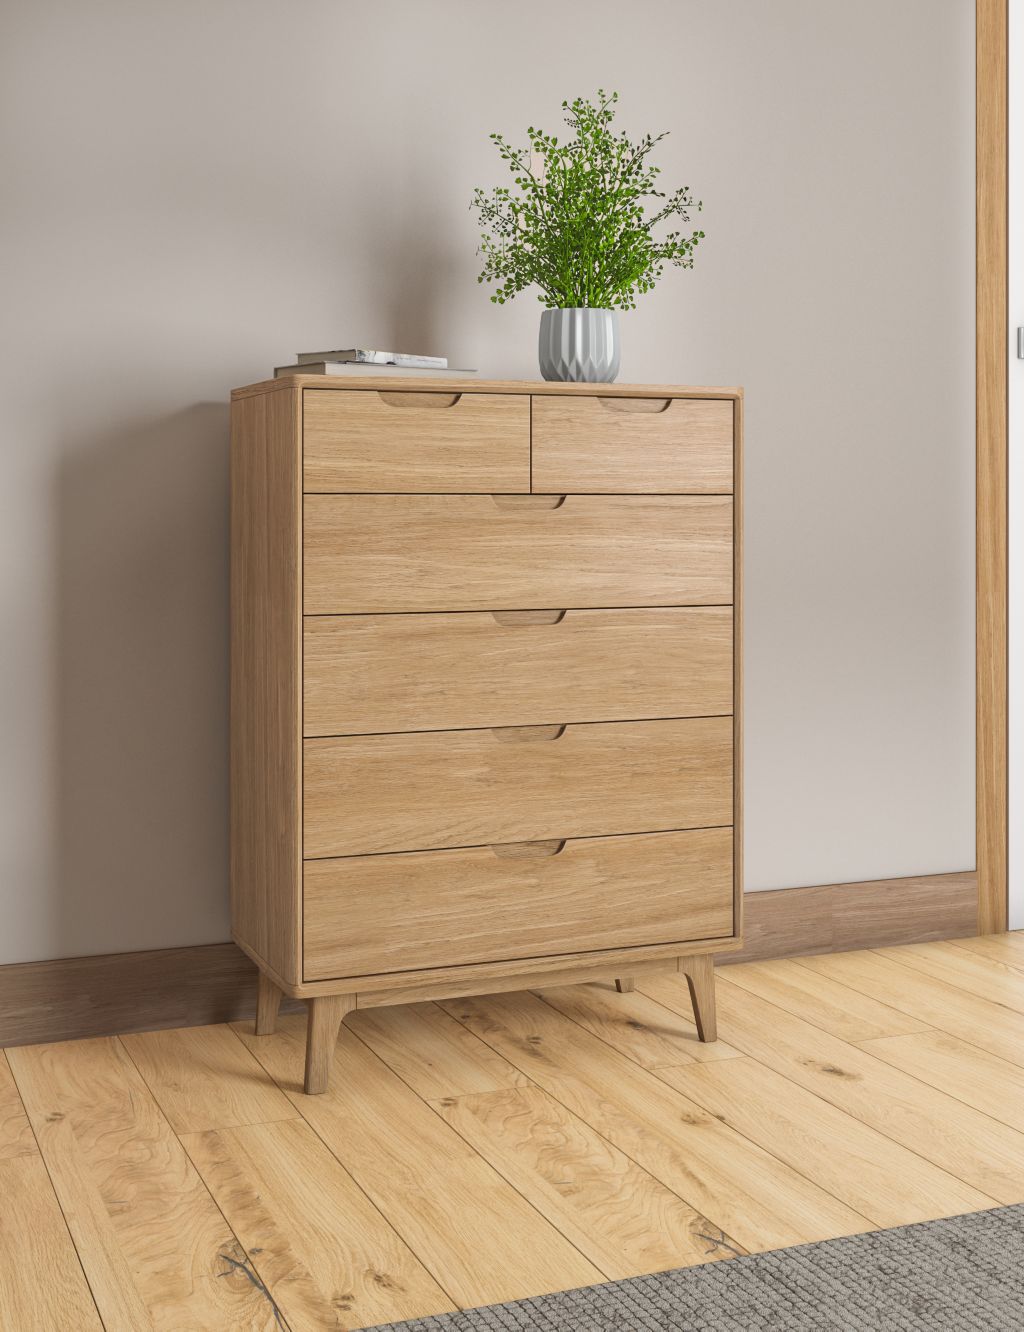 Nord 6 Drawer Chest